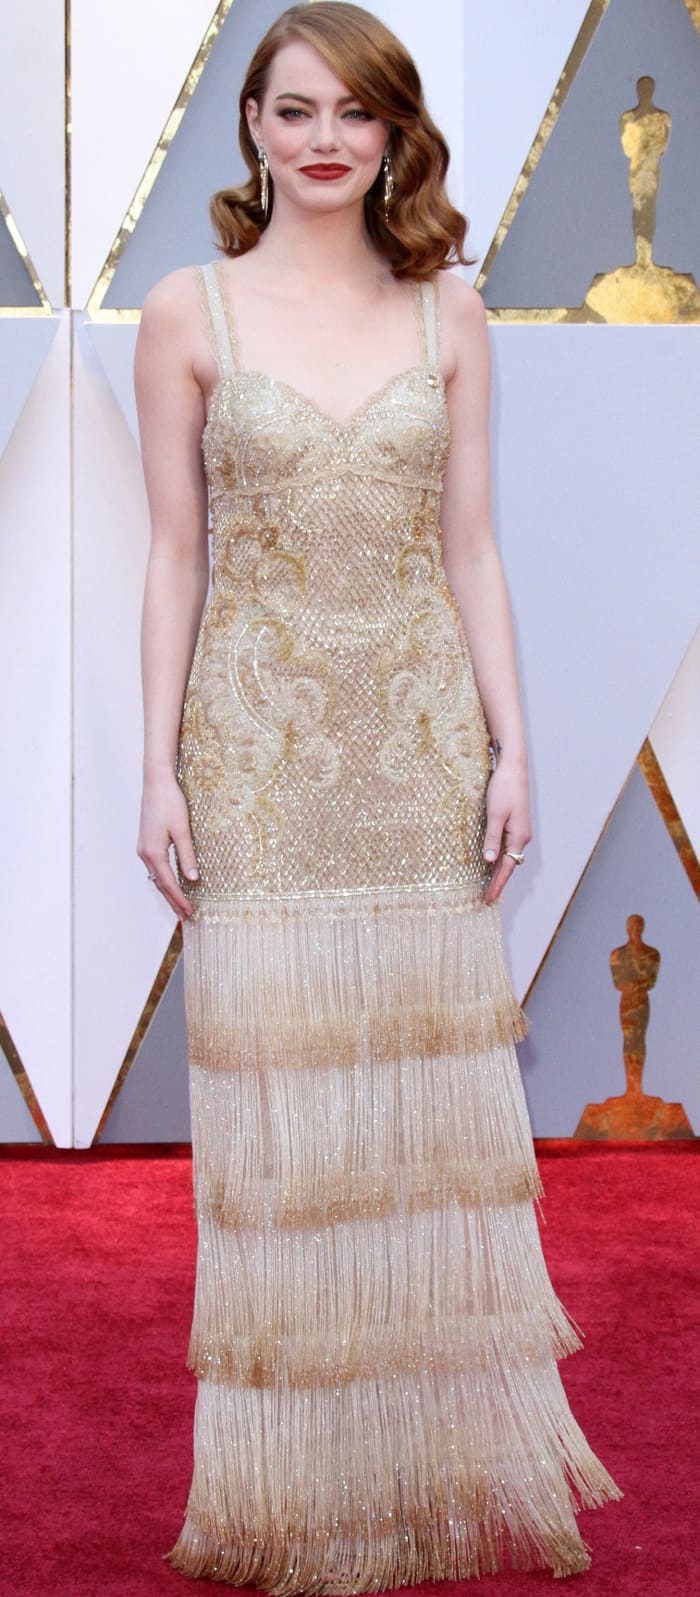 Emma Stone wearing a gold embellished gown from Givenchy at the 2017 Oscars